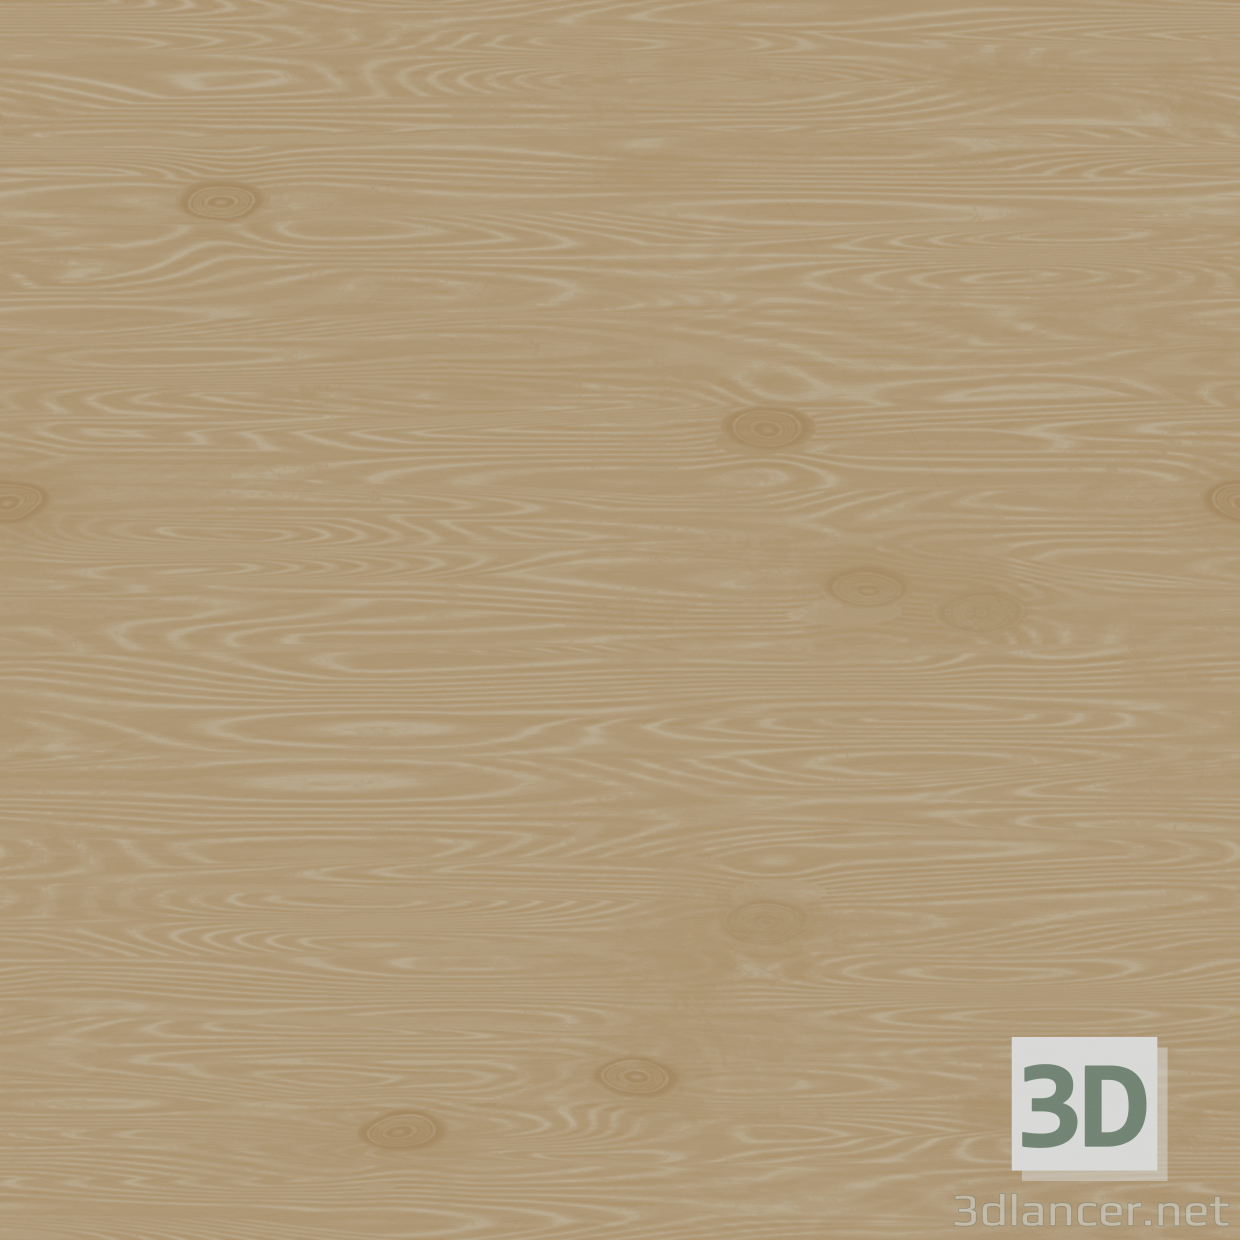 Texture Board free download - image